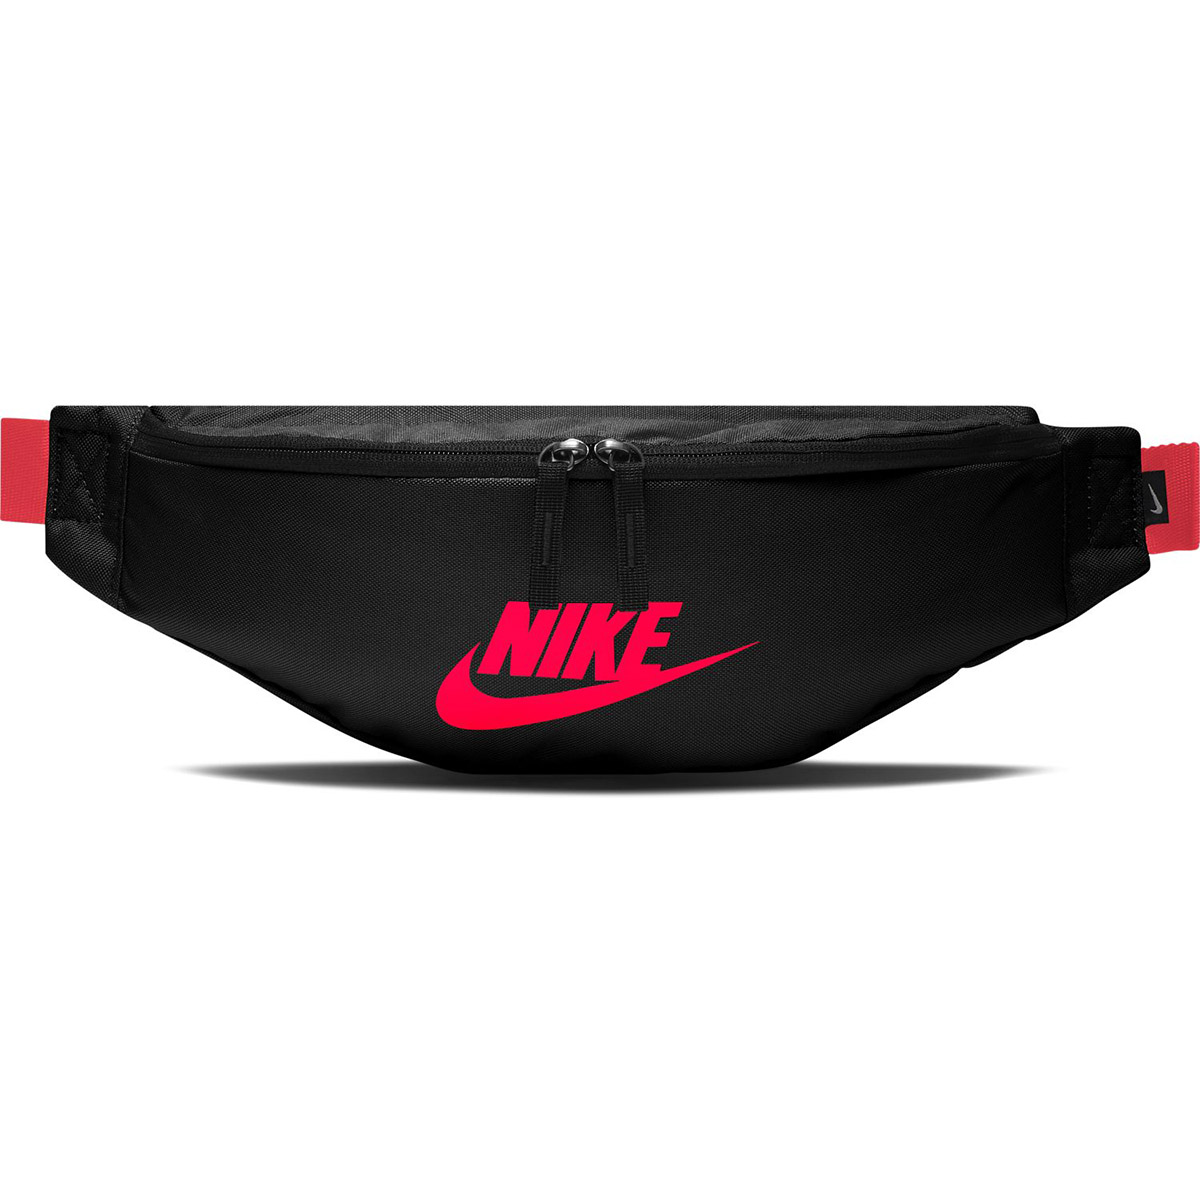 Nike Heritage Fanny Pack, , large image number null